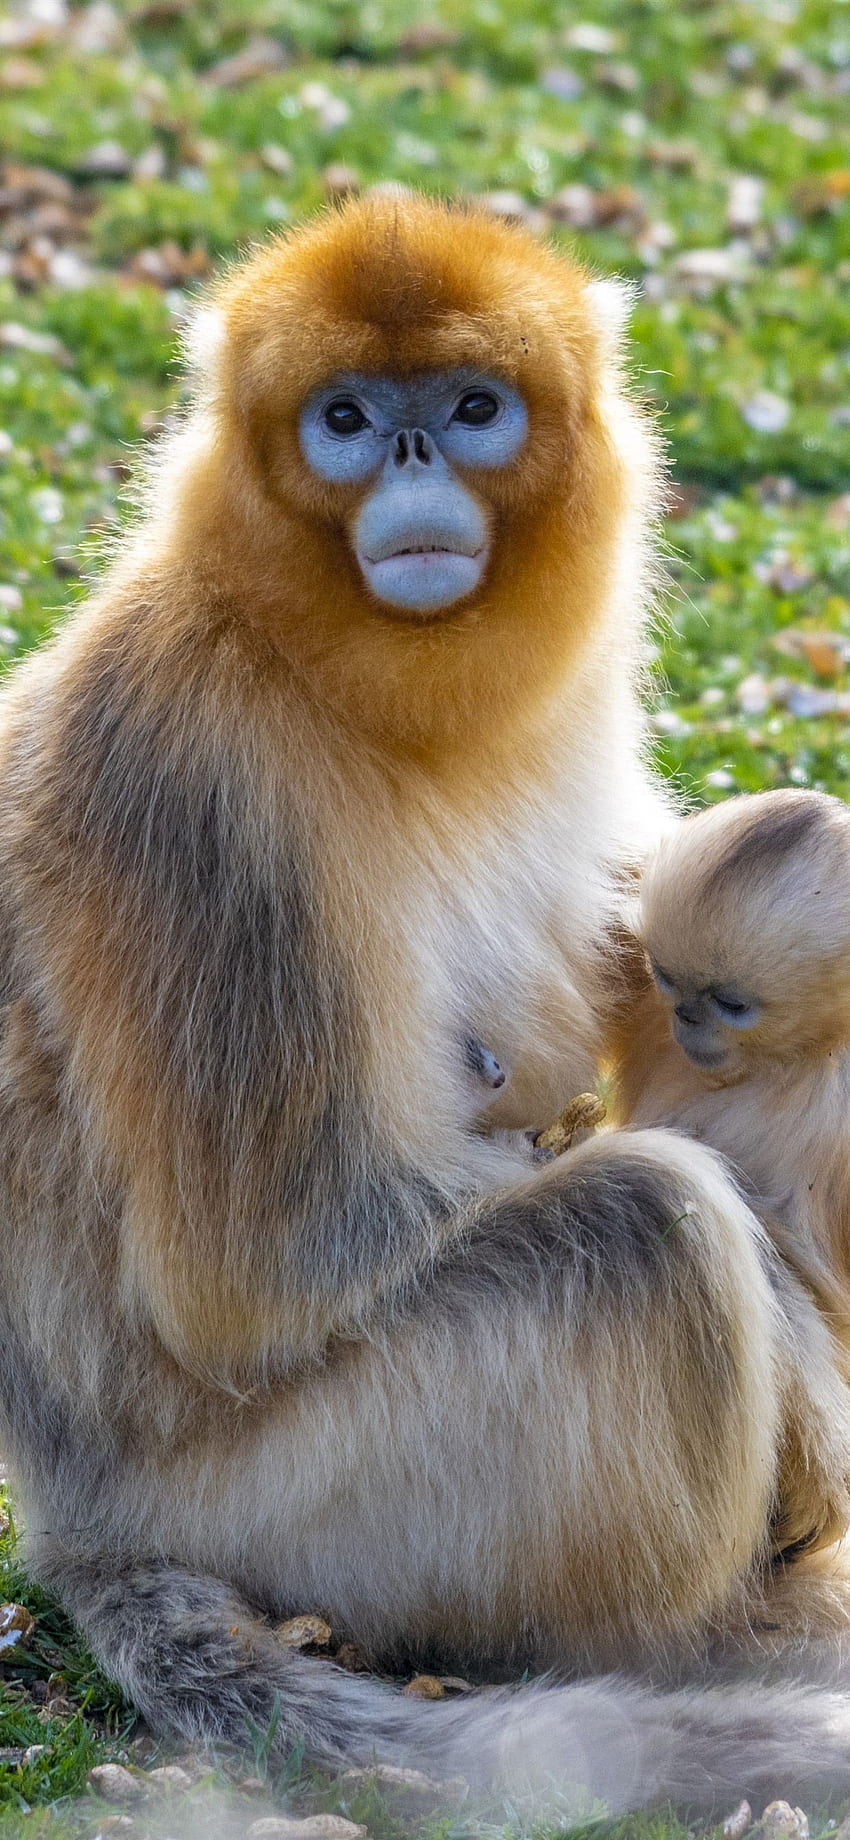 Golden Monkey Mother And Baby IPhone 11 Pro XS Max HD phone wallpaper